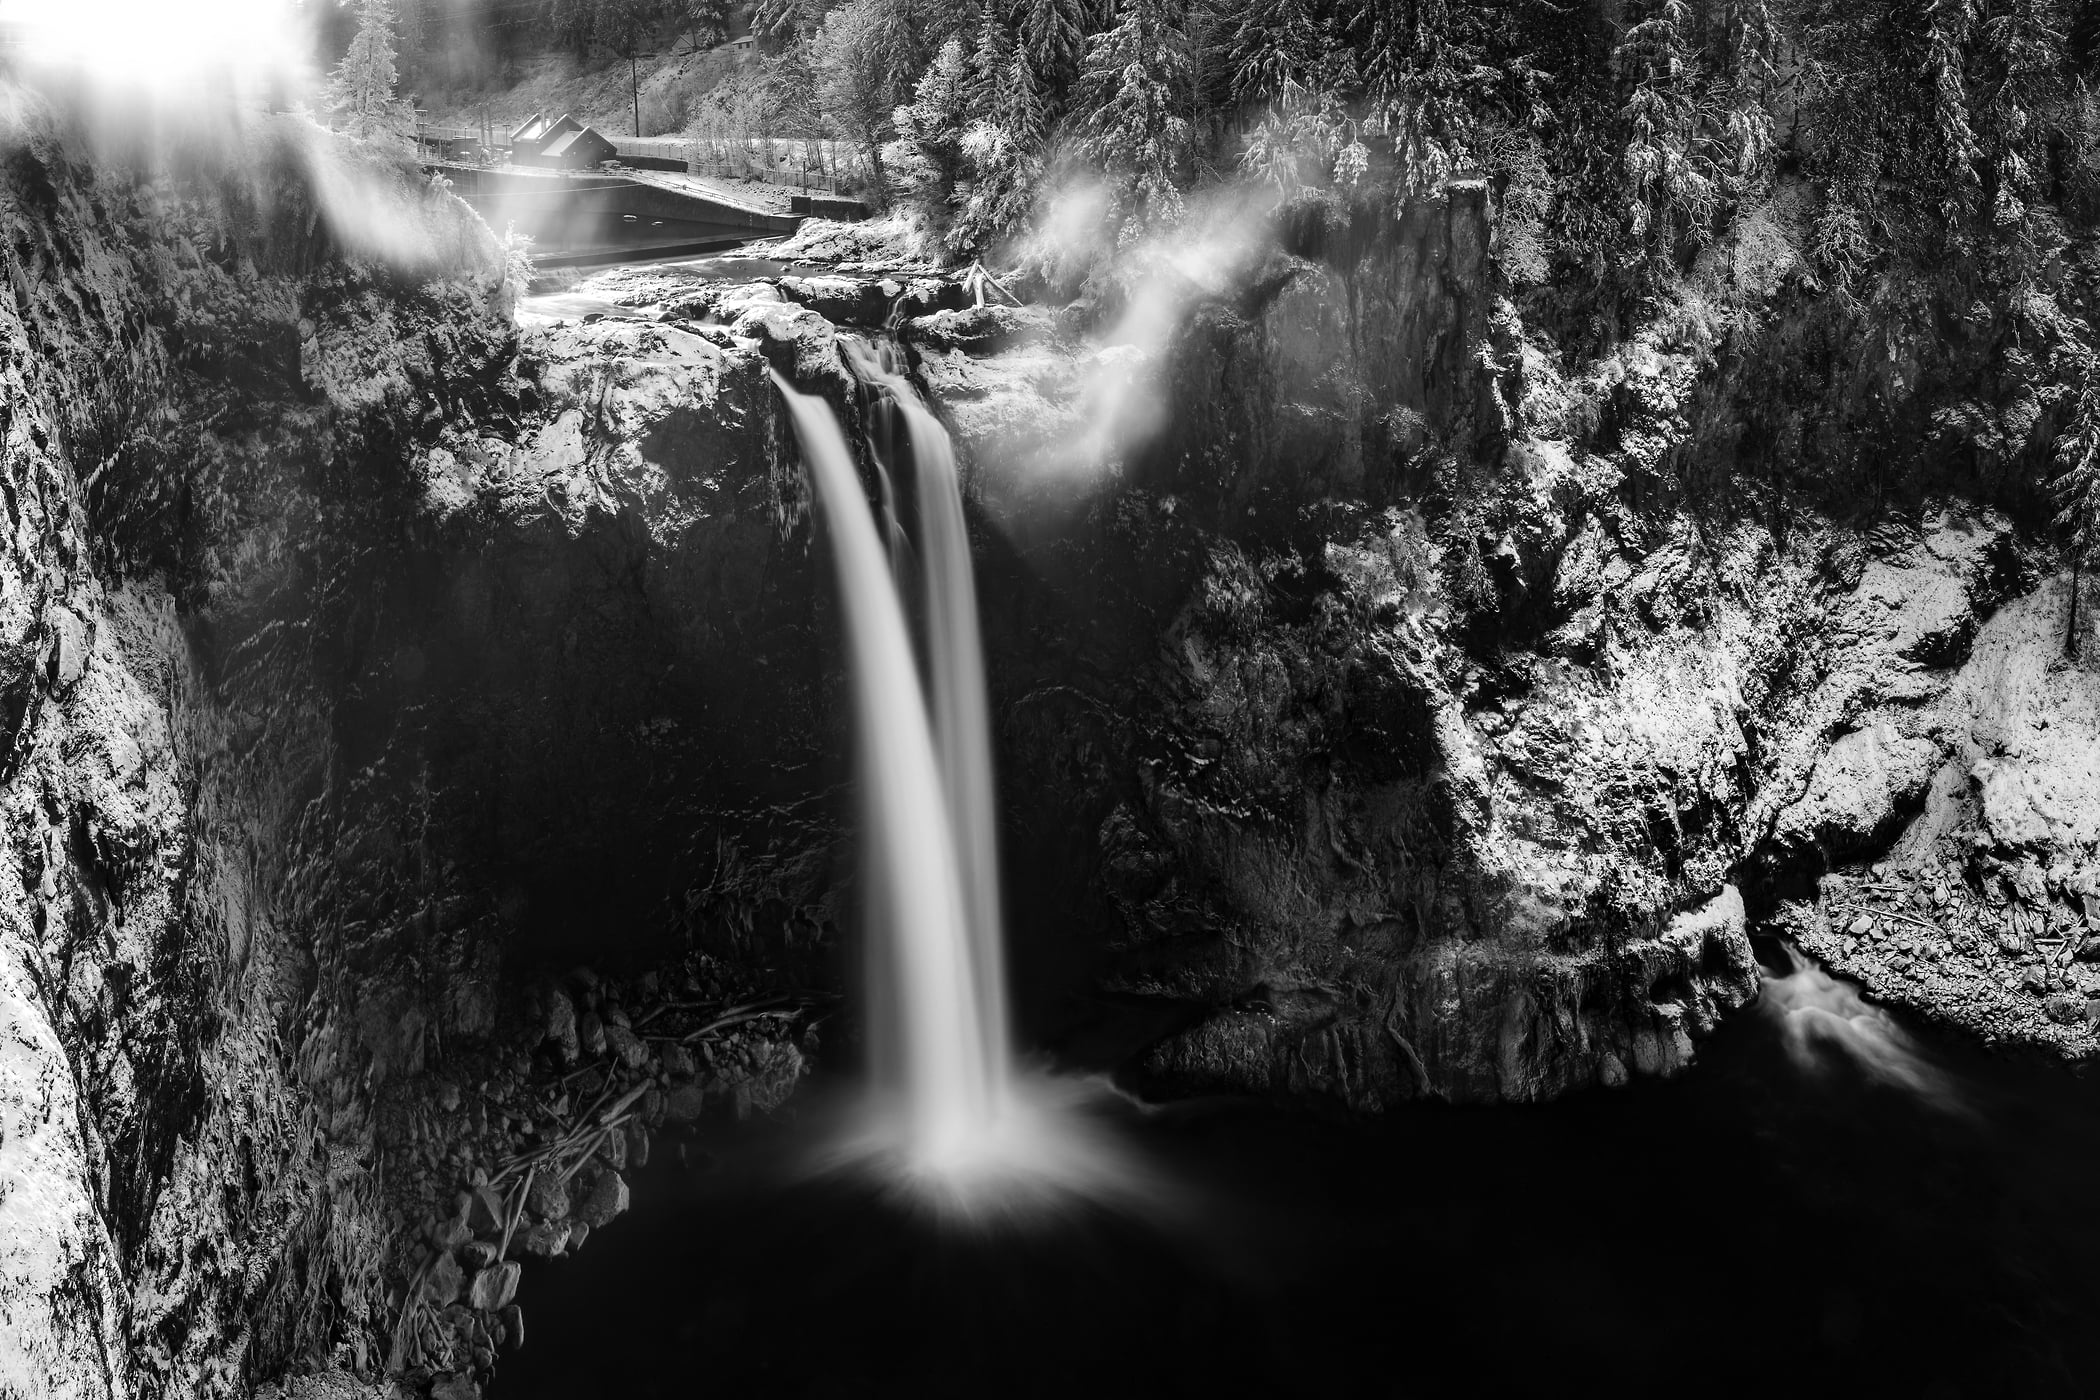 315 megapixels! A very high resolution, large-format VAST photo print of a waterfall in the winter with snow and ice; black and white nature photograph created by Scott Rinckenberger in Snoqualmie Falls, Snoqualmie, Washington